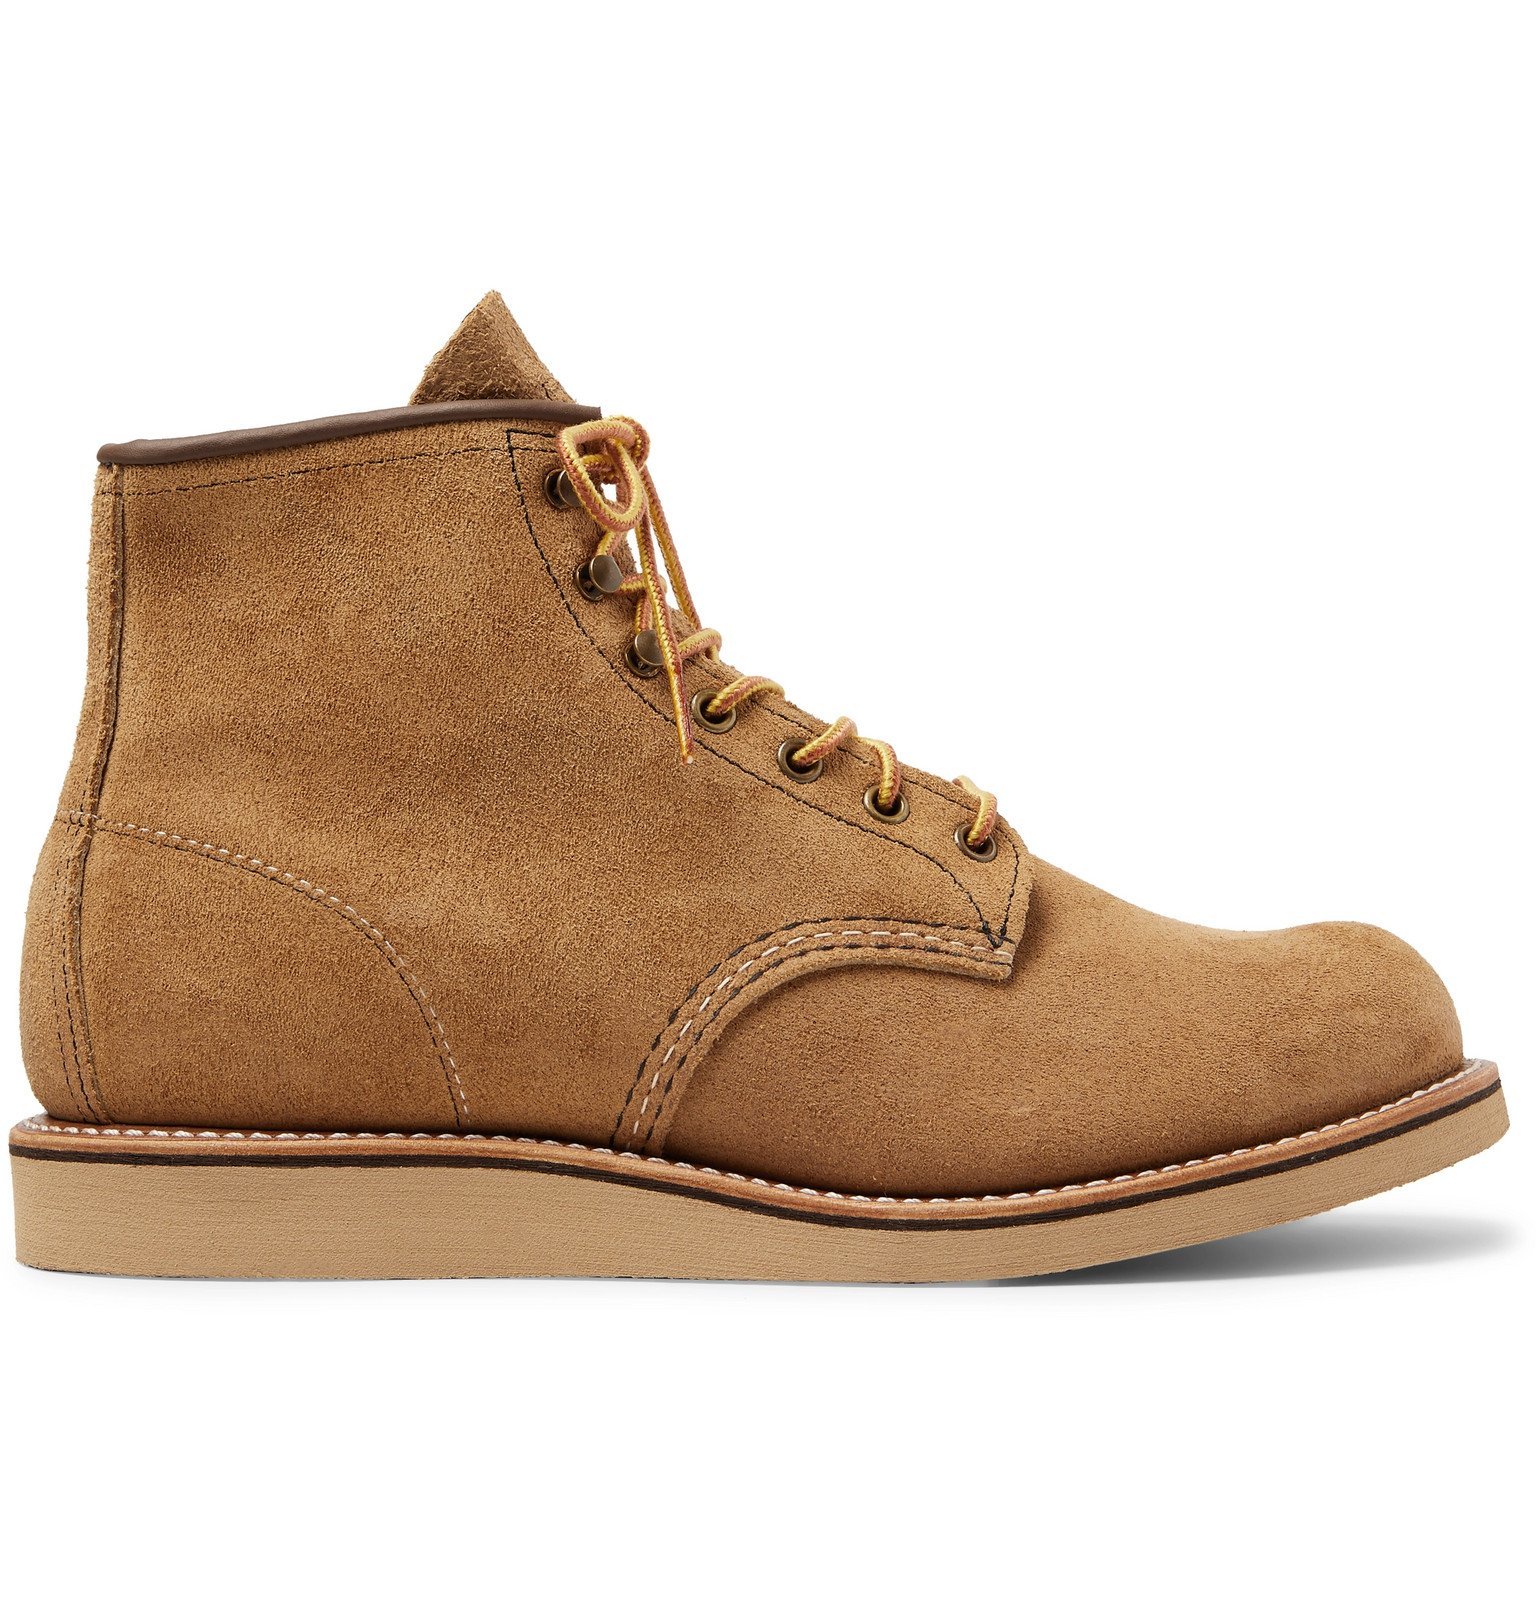 Red Wing Shoes - 2953 Rover Roughout Leather Boots - Brown Red Wing Shoes